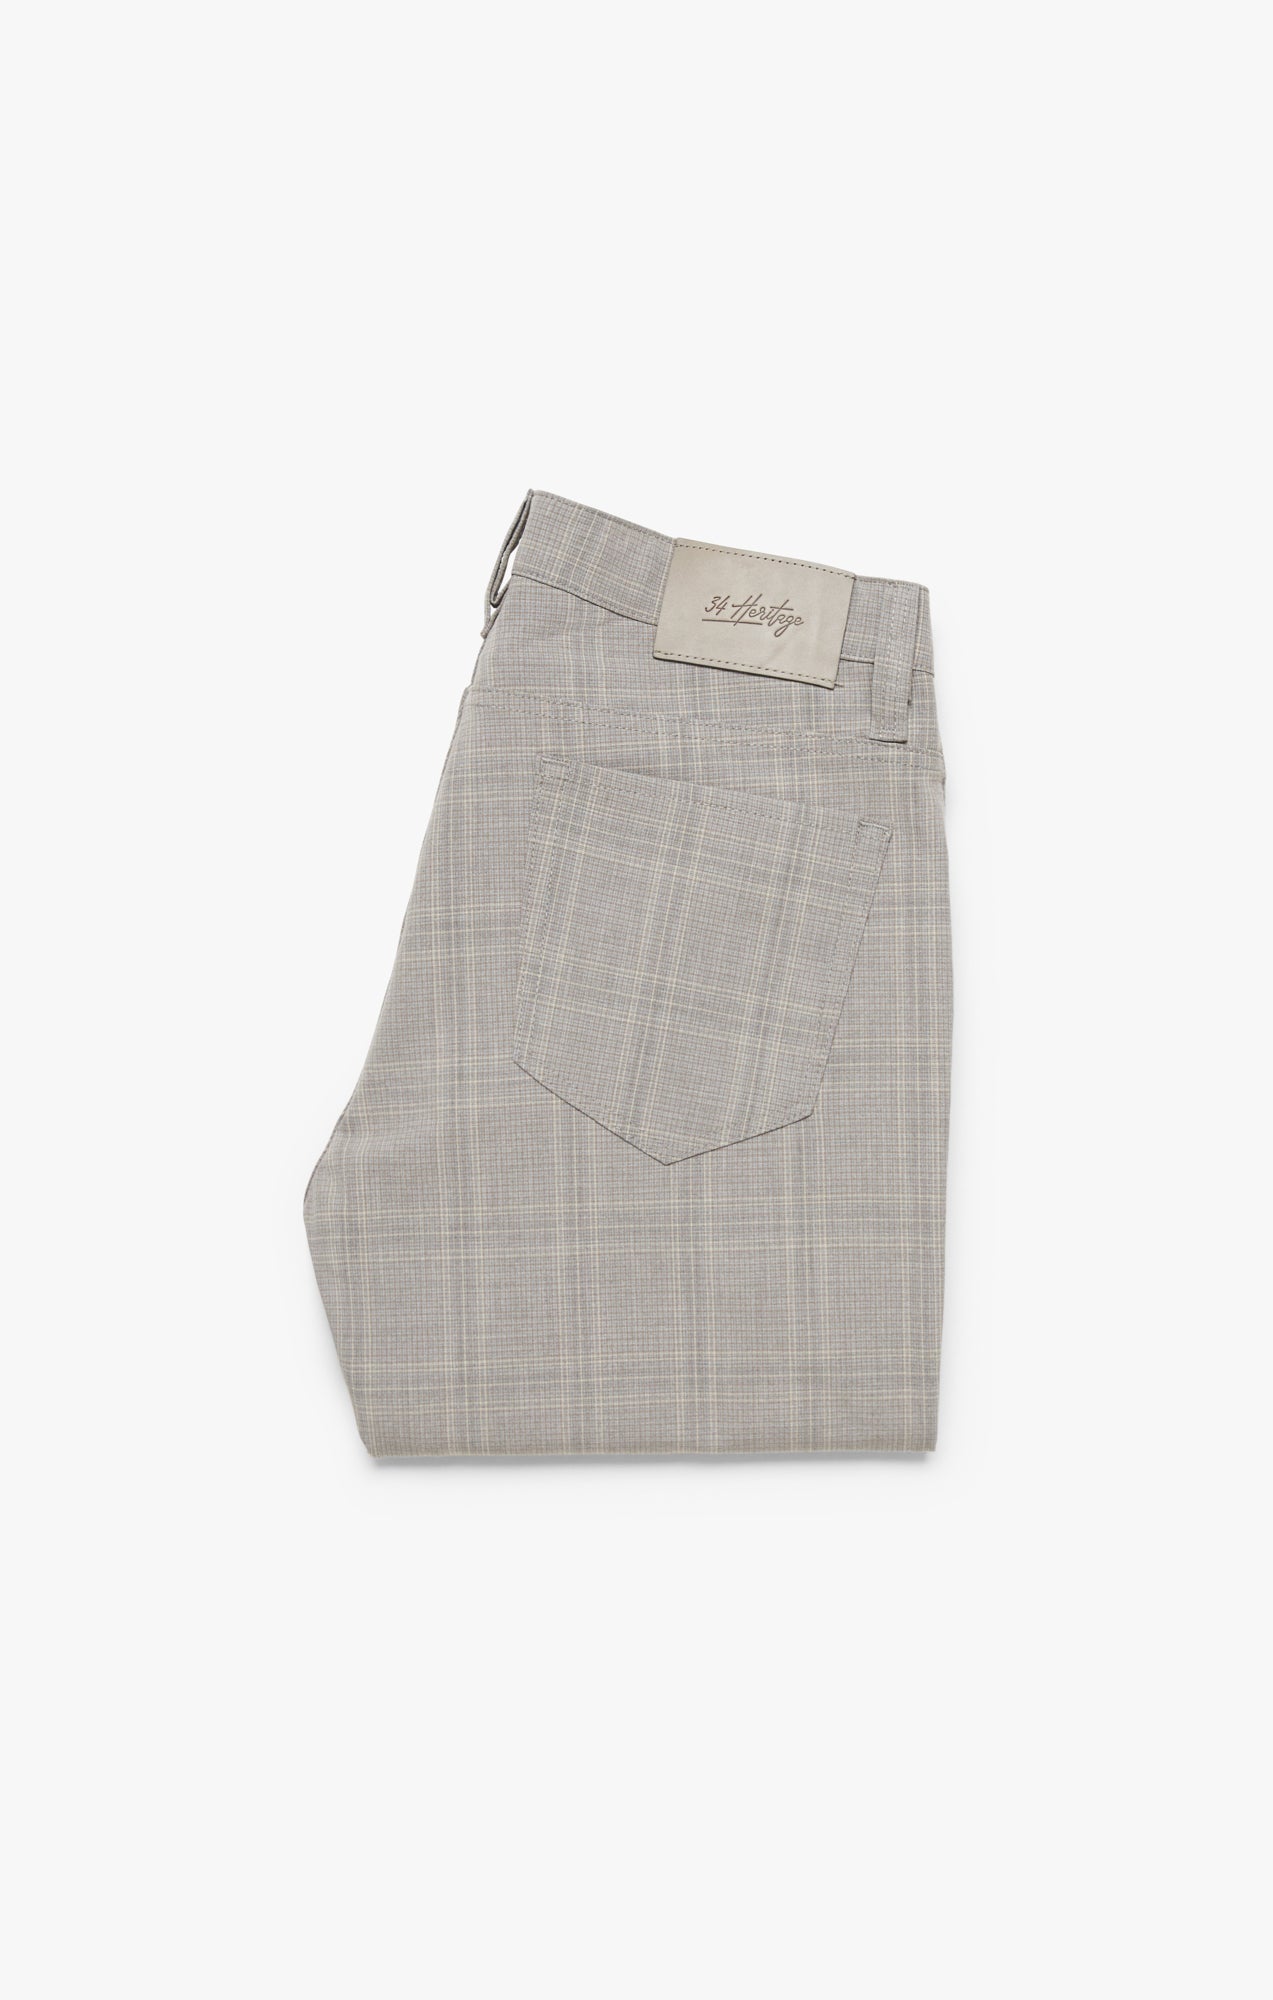 Courage Straight Leg Pants In Grey Checked